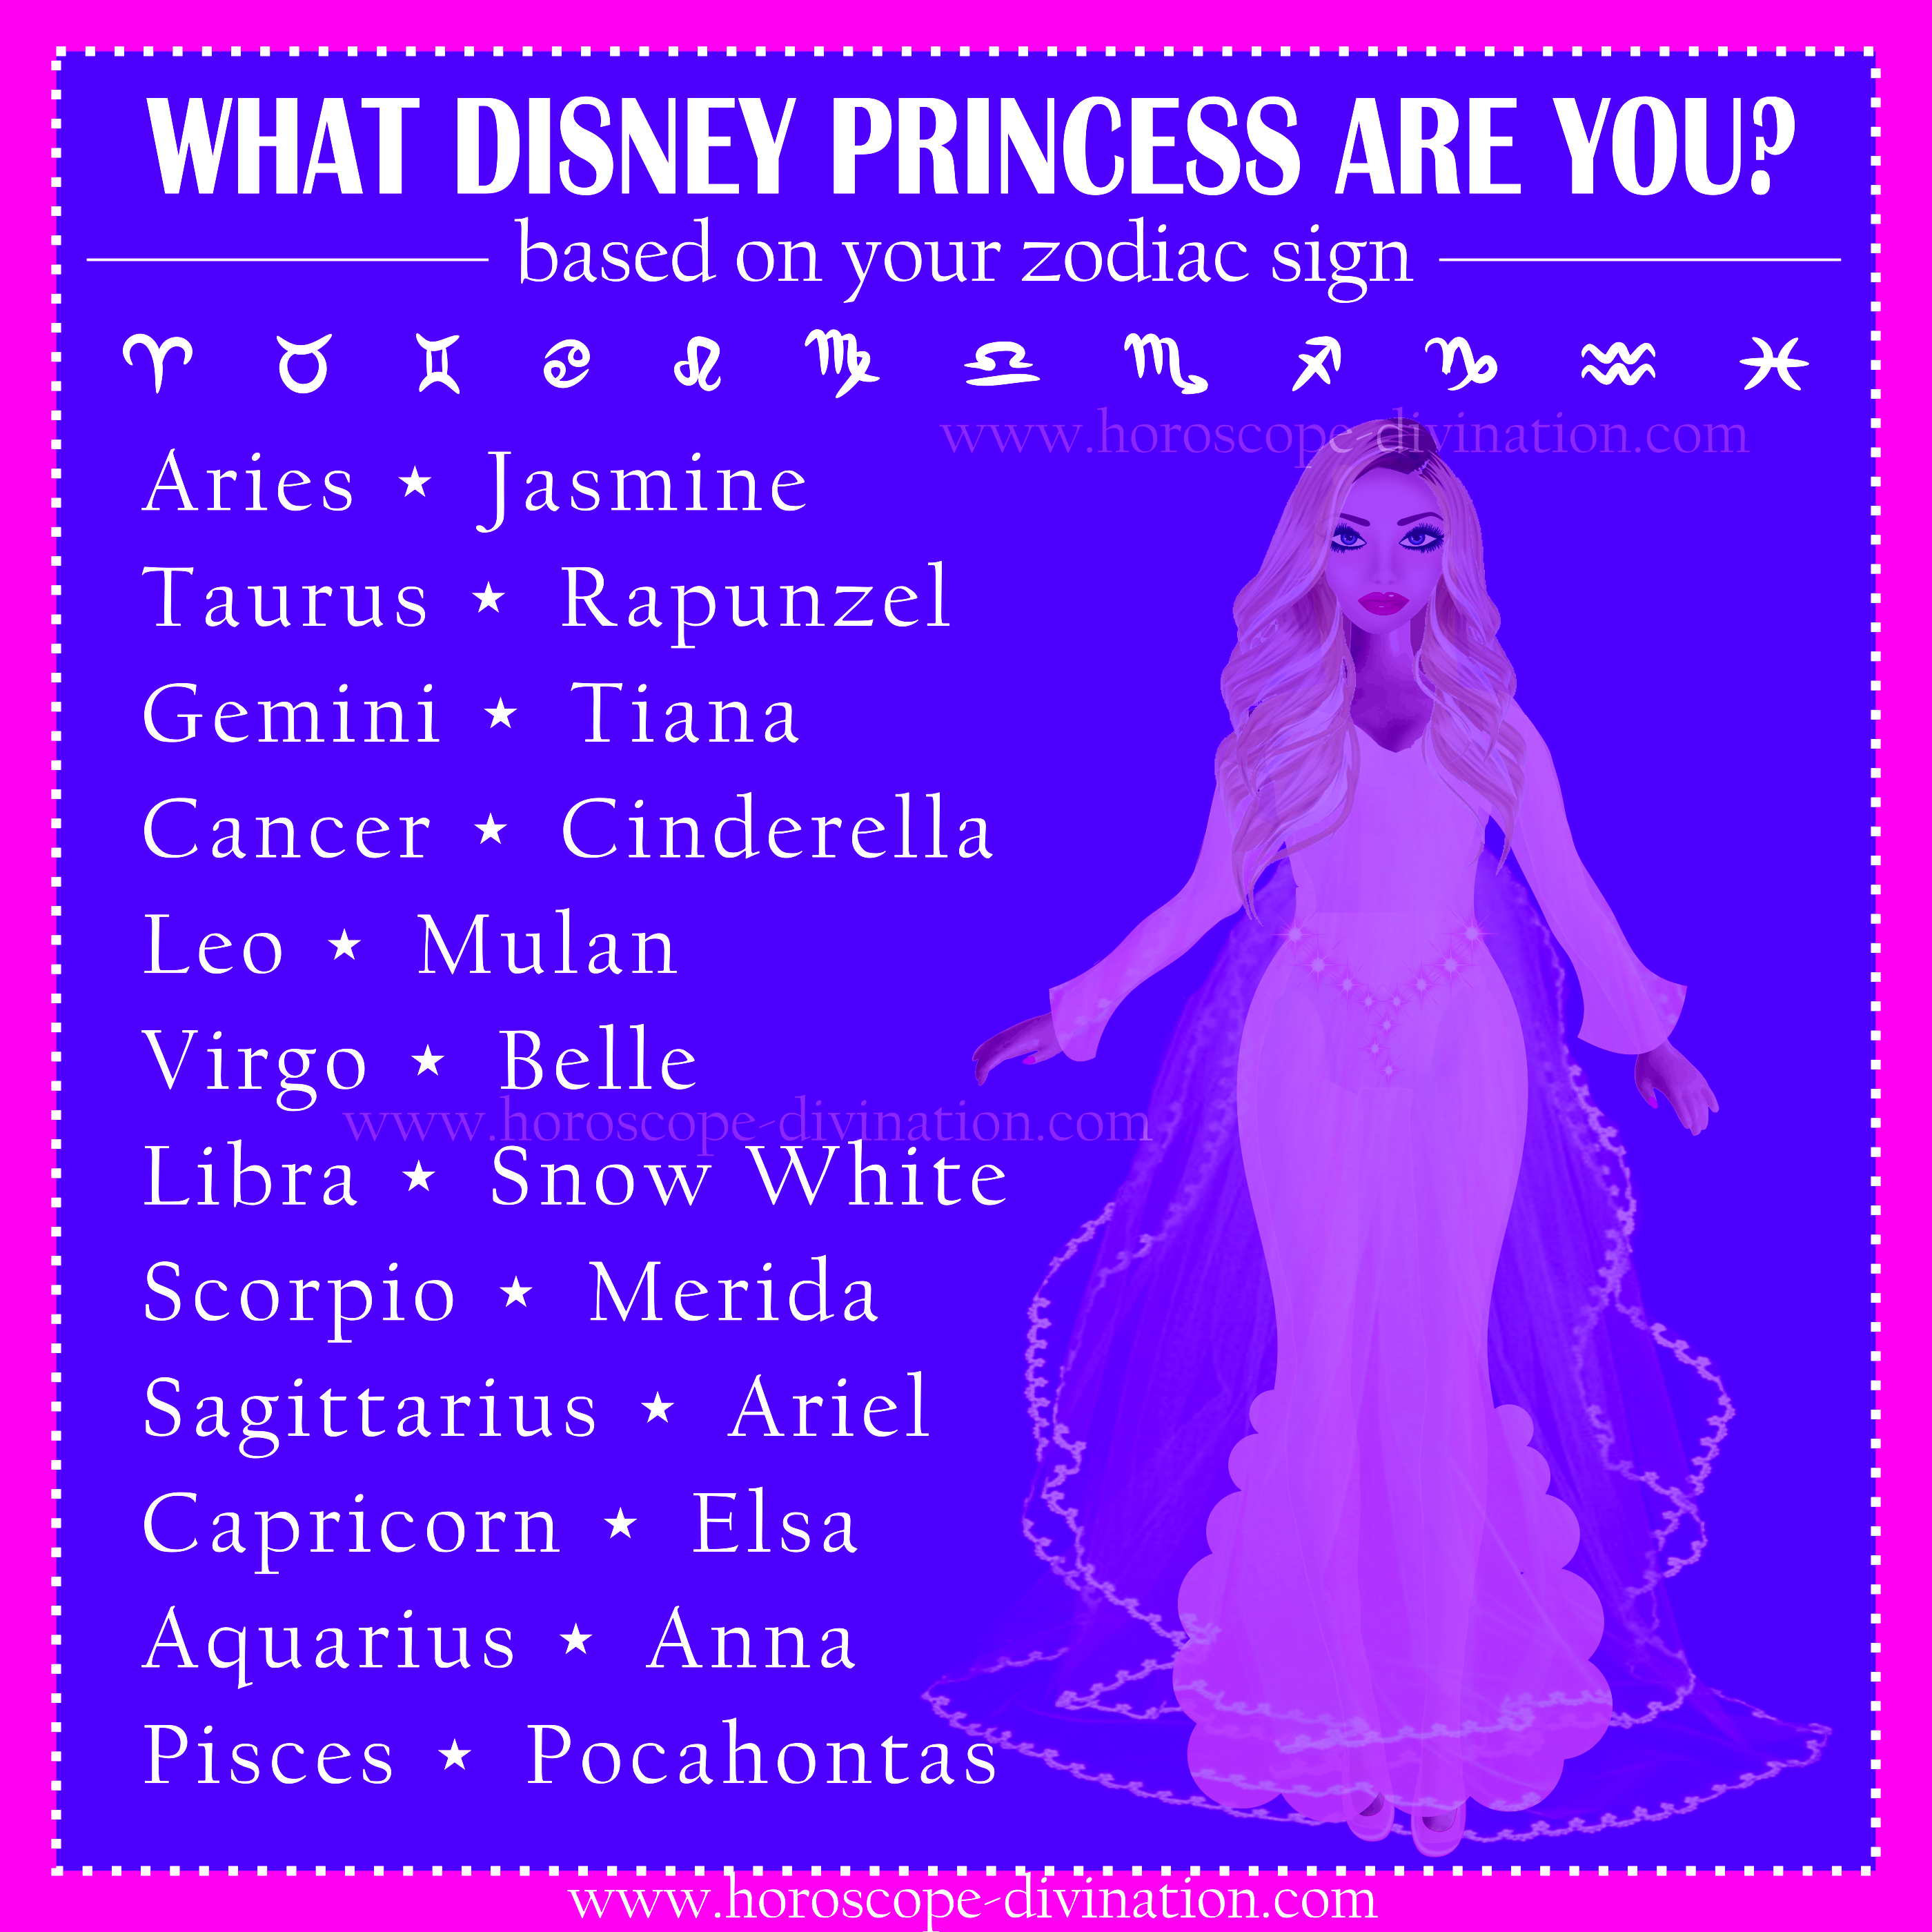 What Disney Princess Are You Based on Your Zodiac Sign